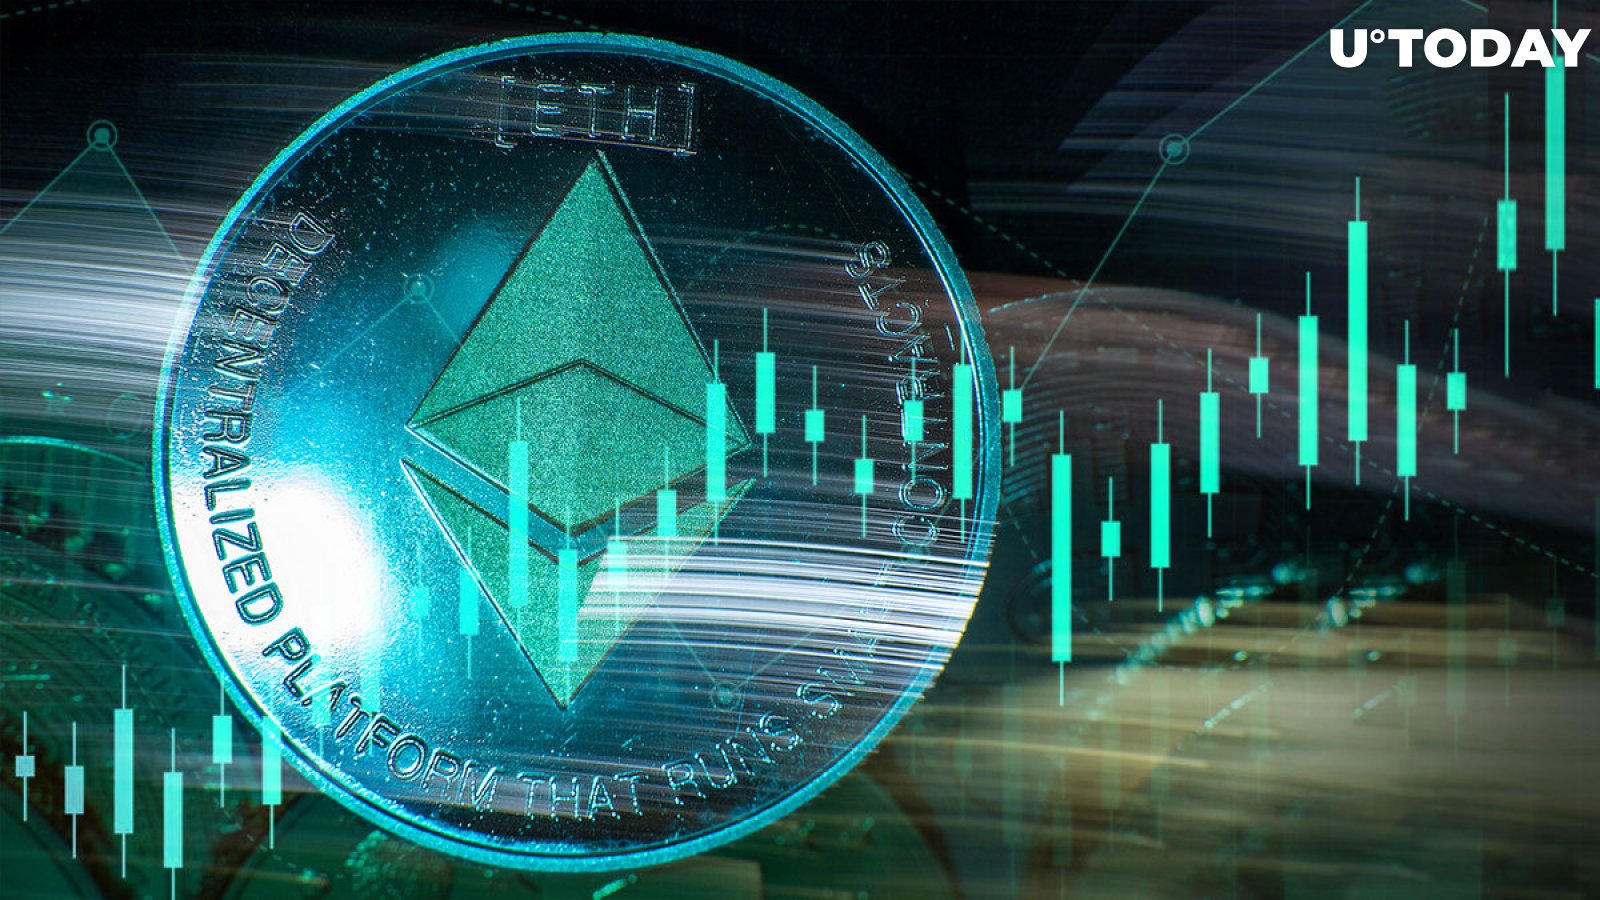 Here's What Pushed ETH Back to Highest Level in 5 Weeks: Santiment